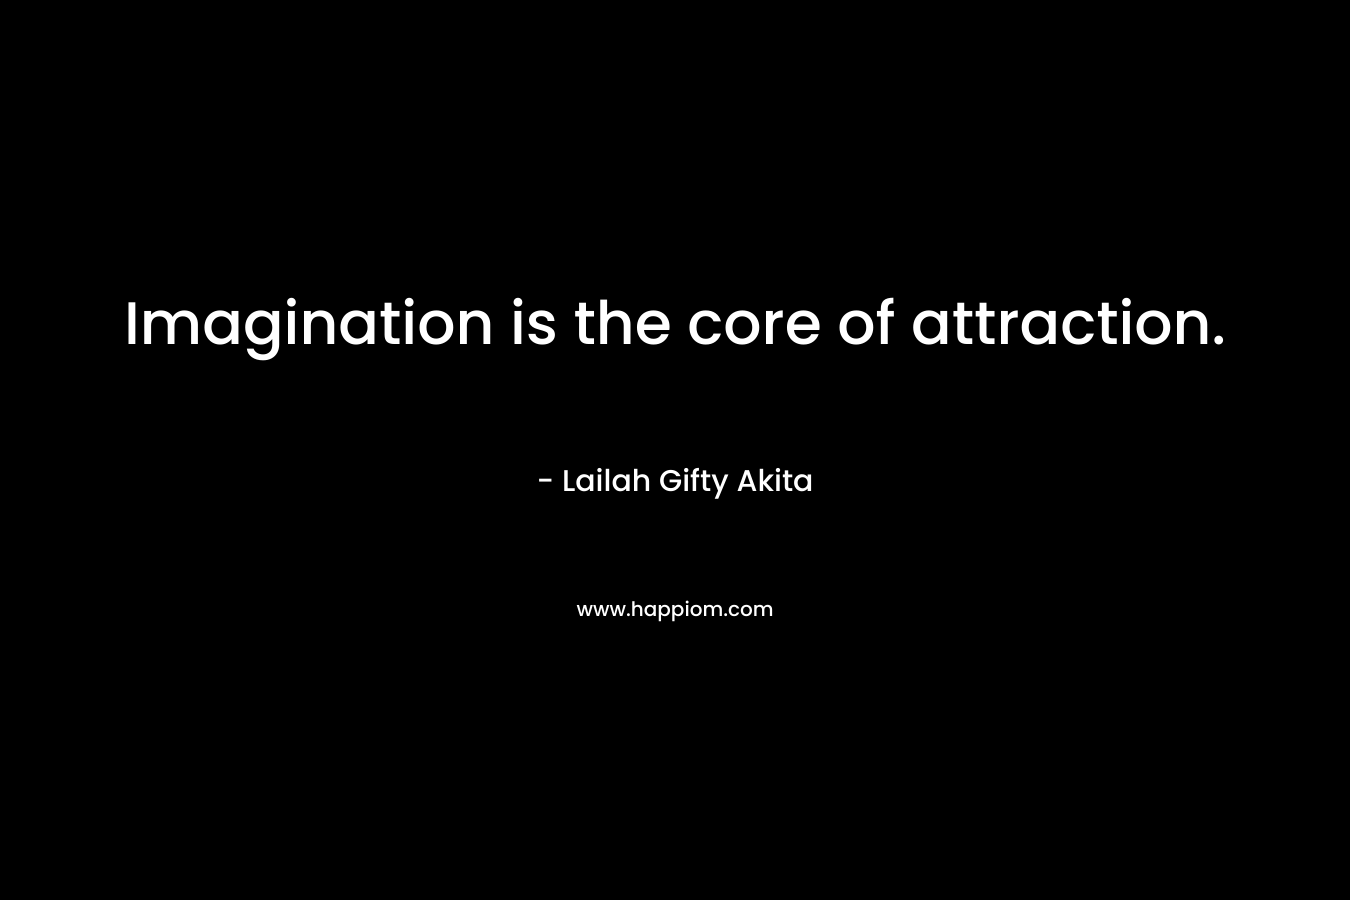 Imagination is the core of attraction.